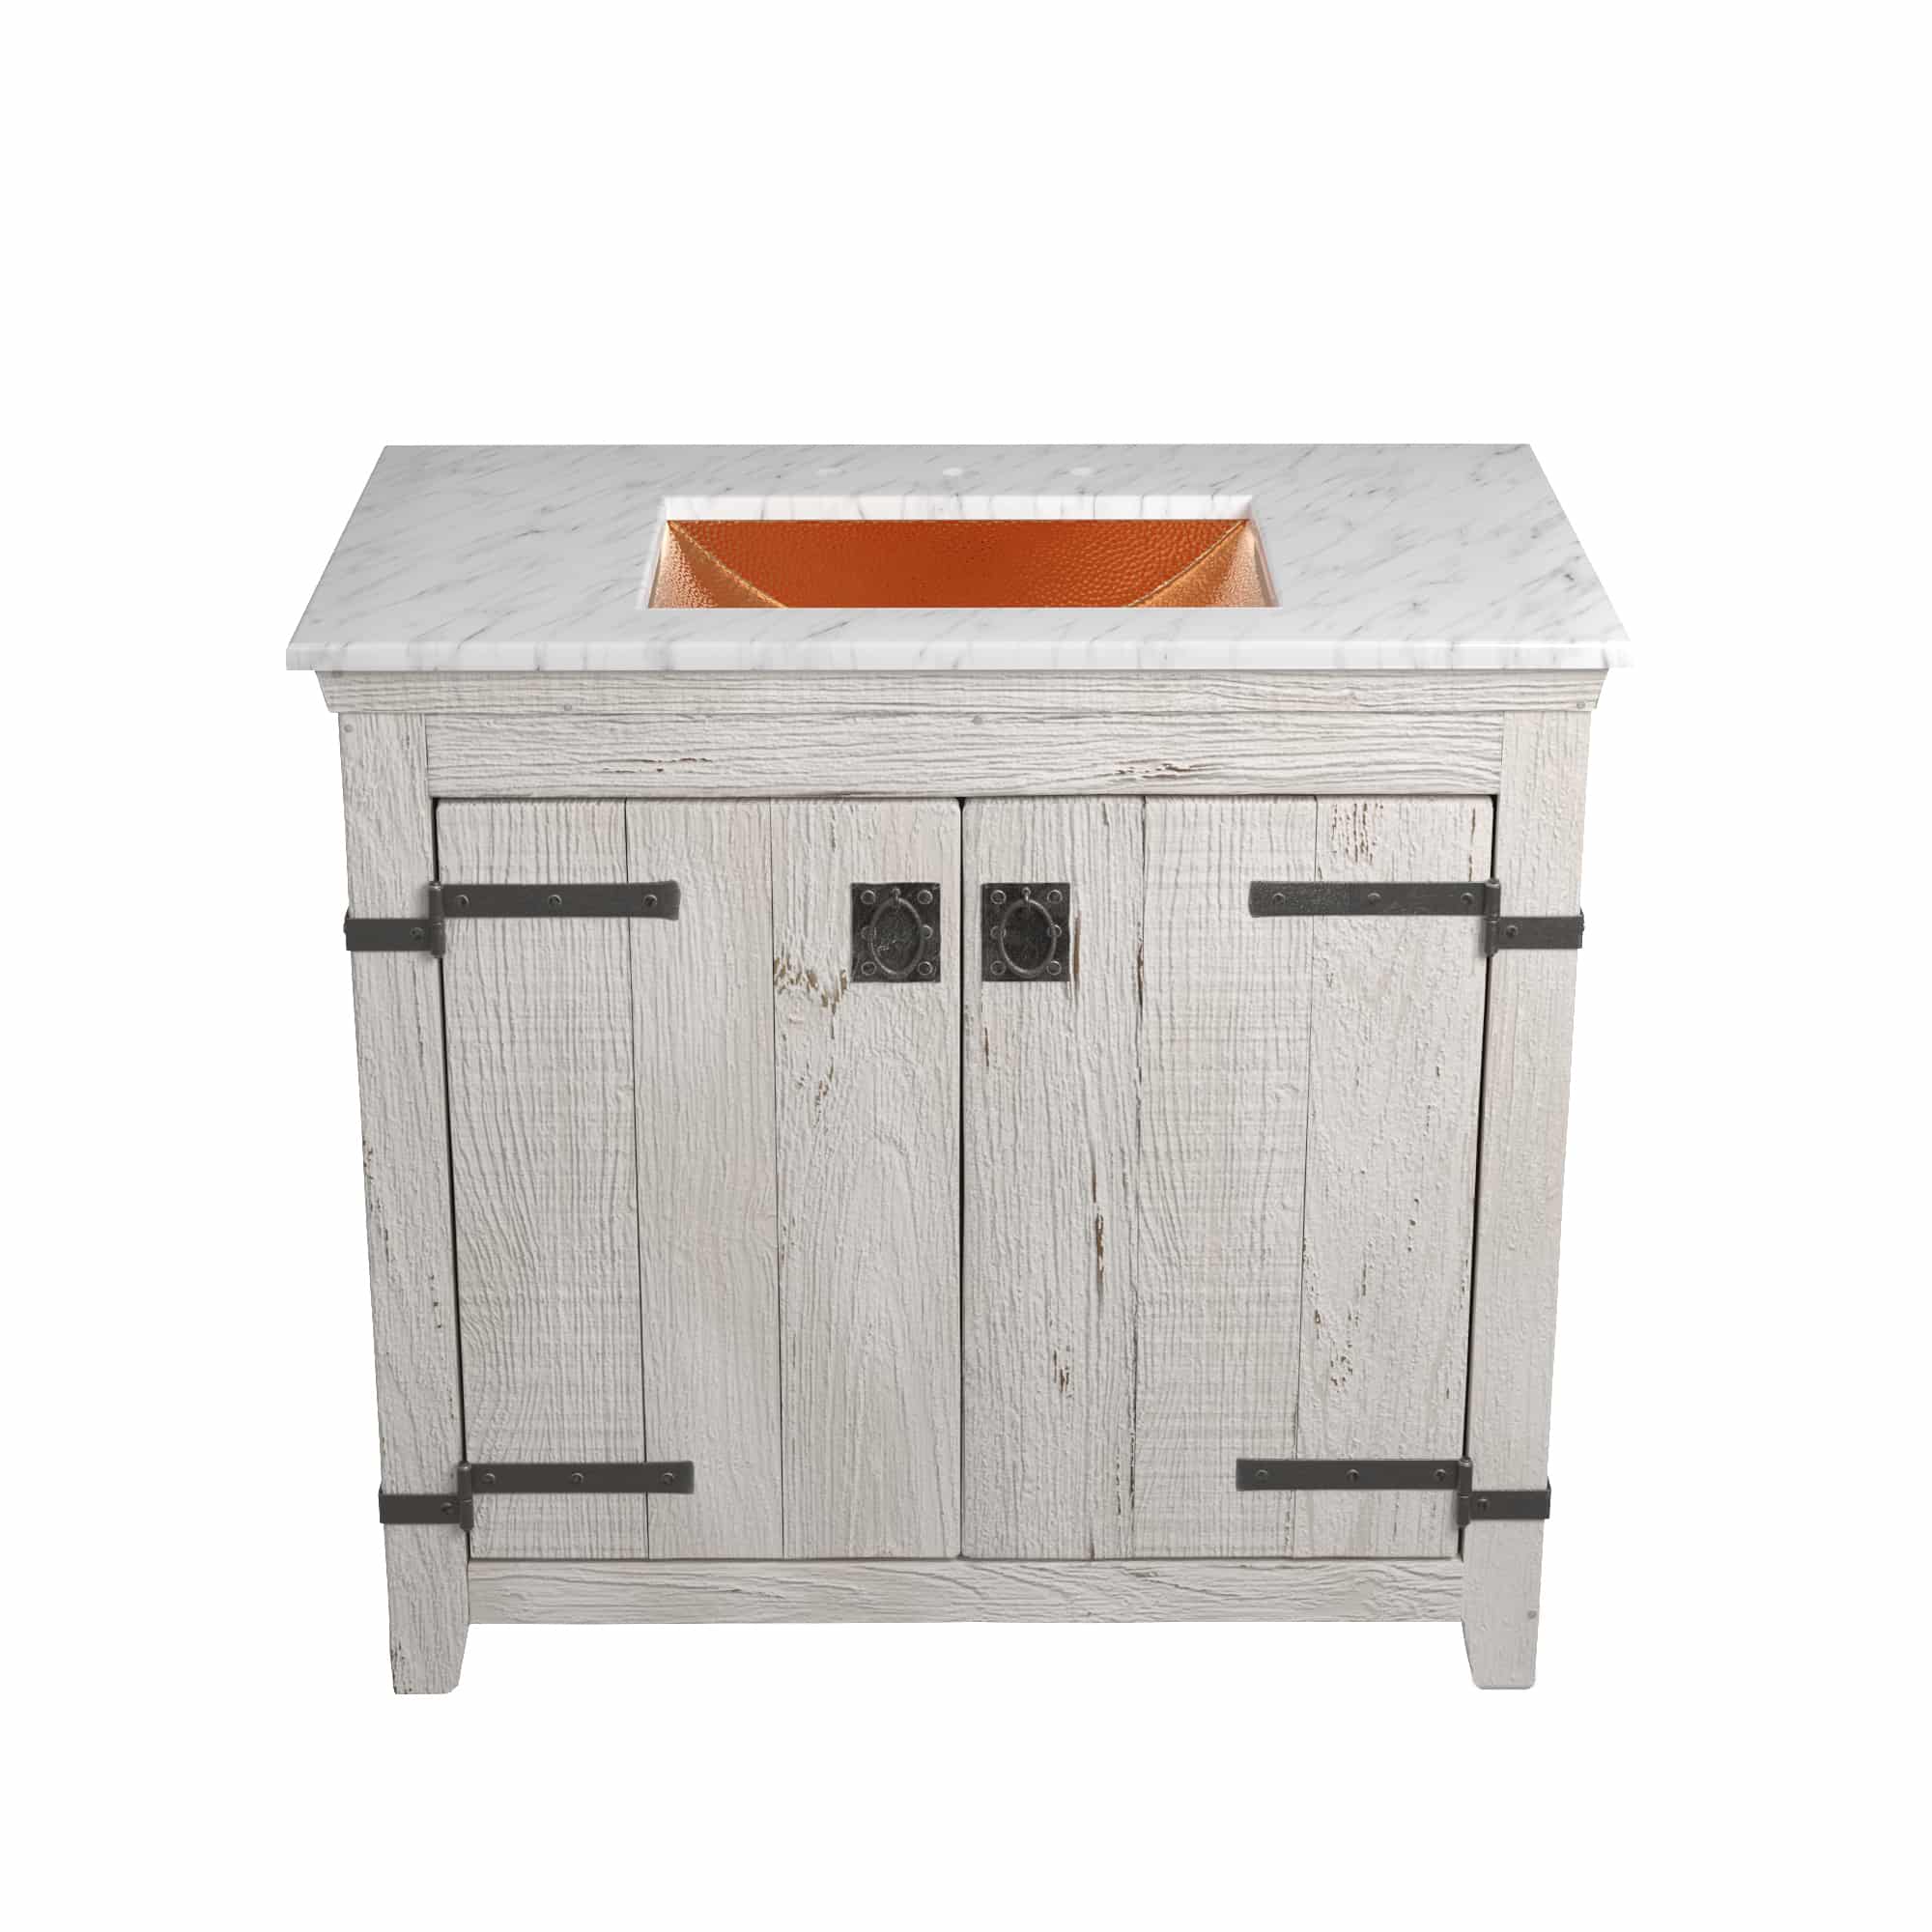 Native Trails 36" Americana Vanity in Whitewash with Carrara Marble Top and Avila in Polished Copper, 8" Widespread Faucet Holes, BND36-VB-CT-CP-010